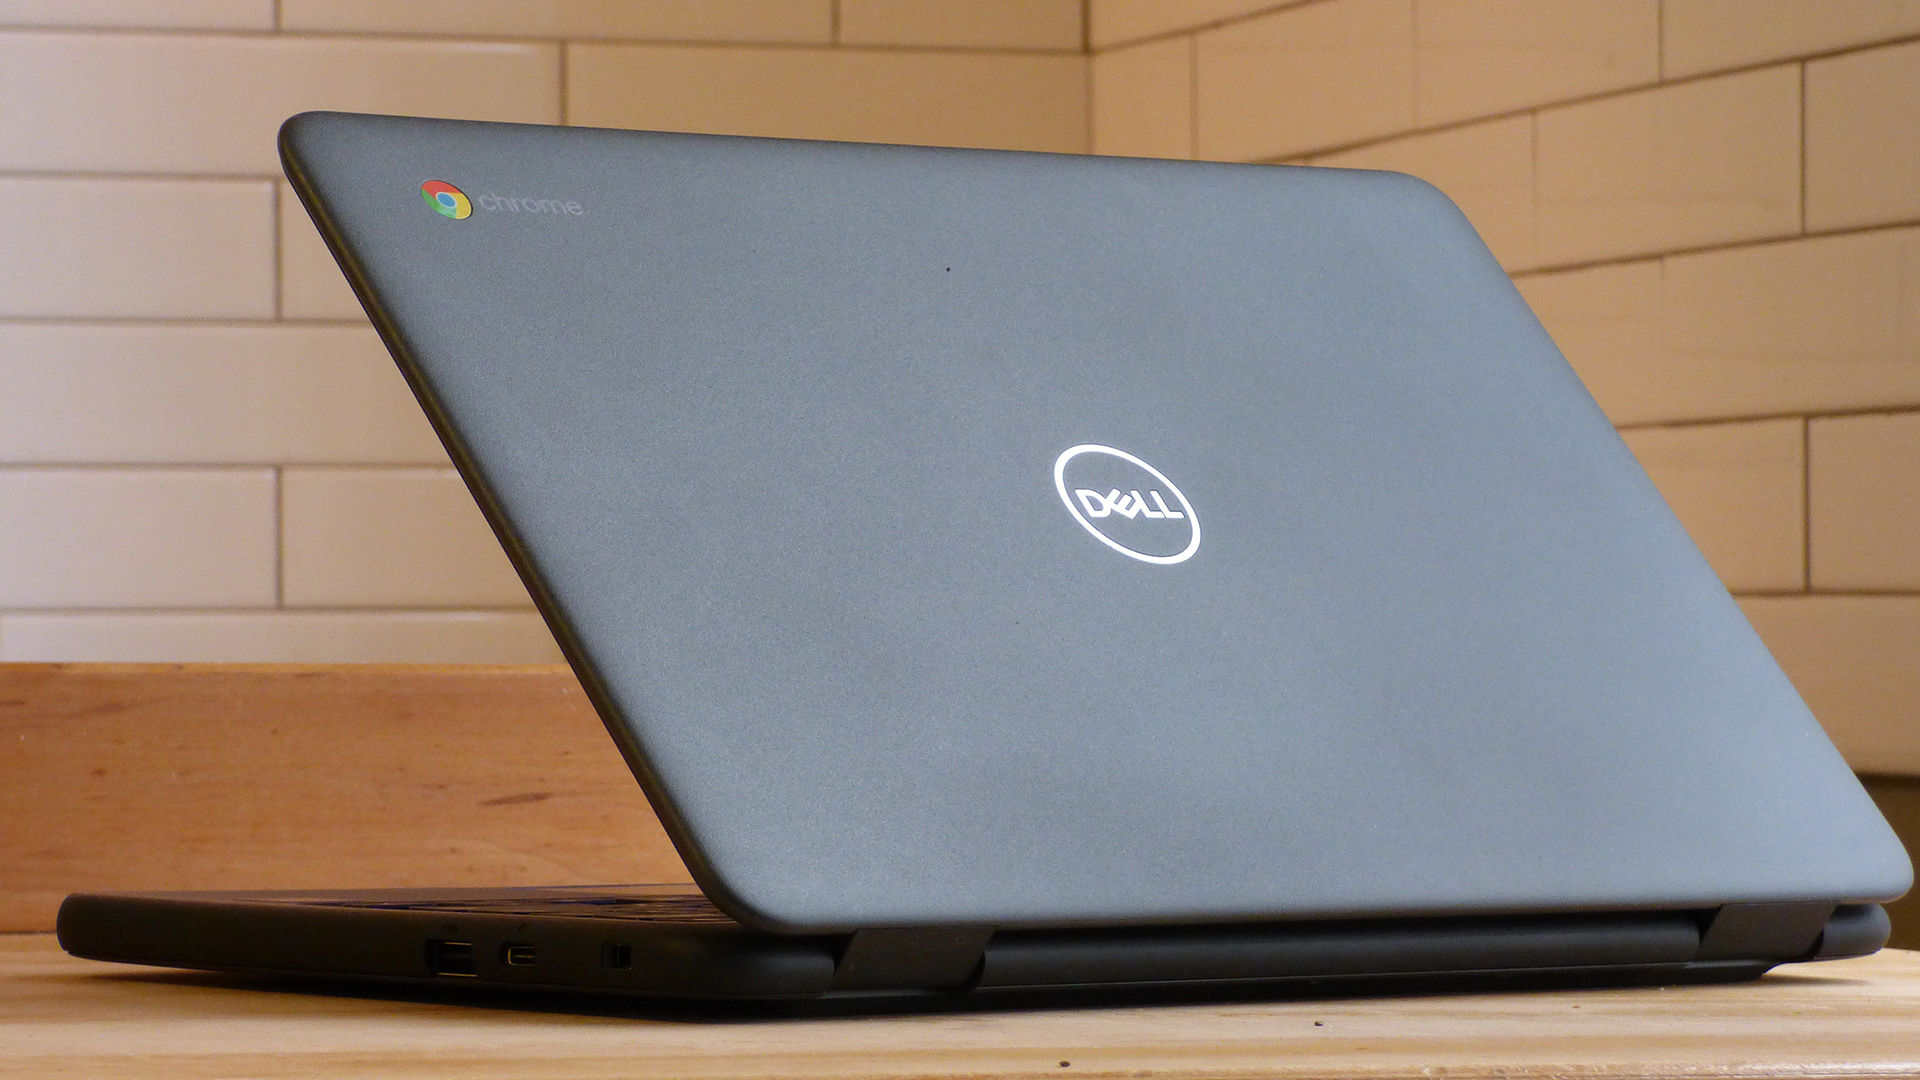 Dell Chromebook 11 (3100) Review - PCMag